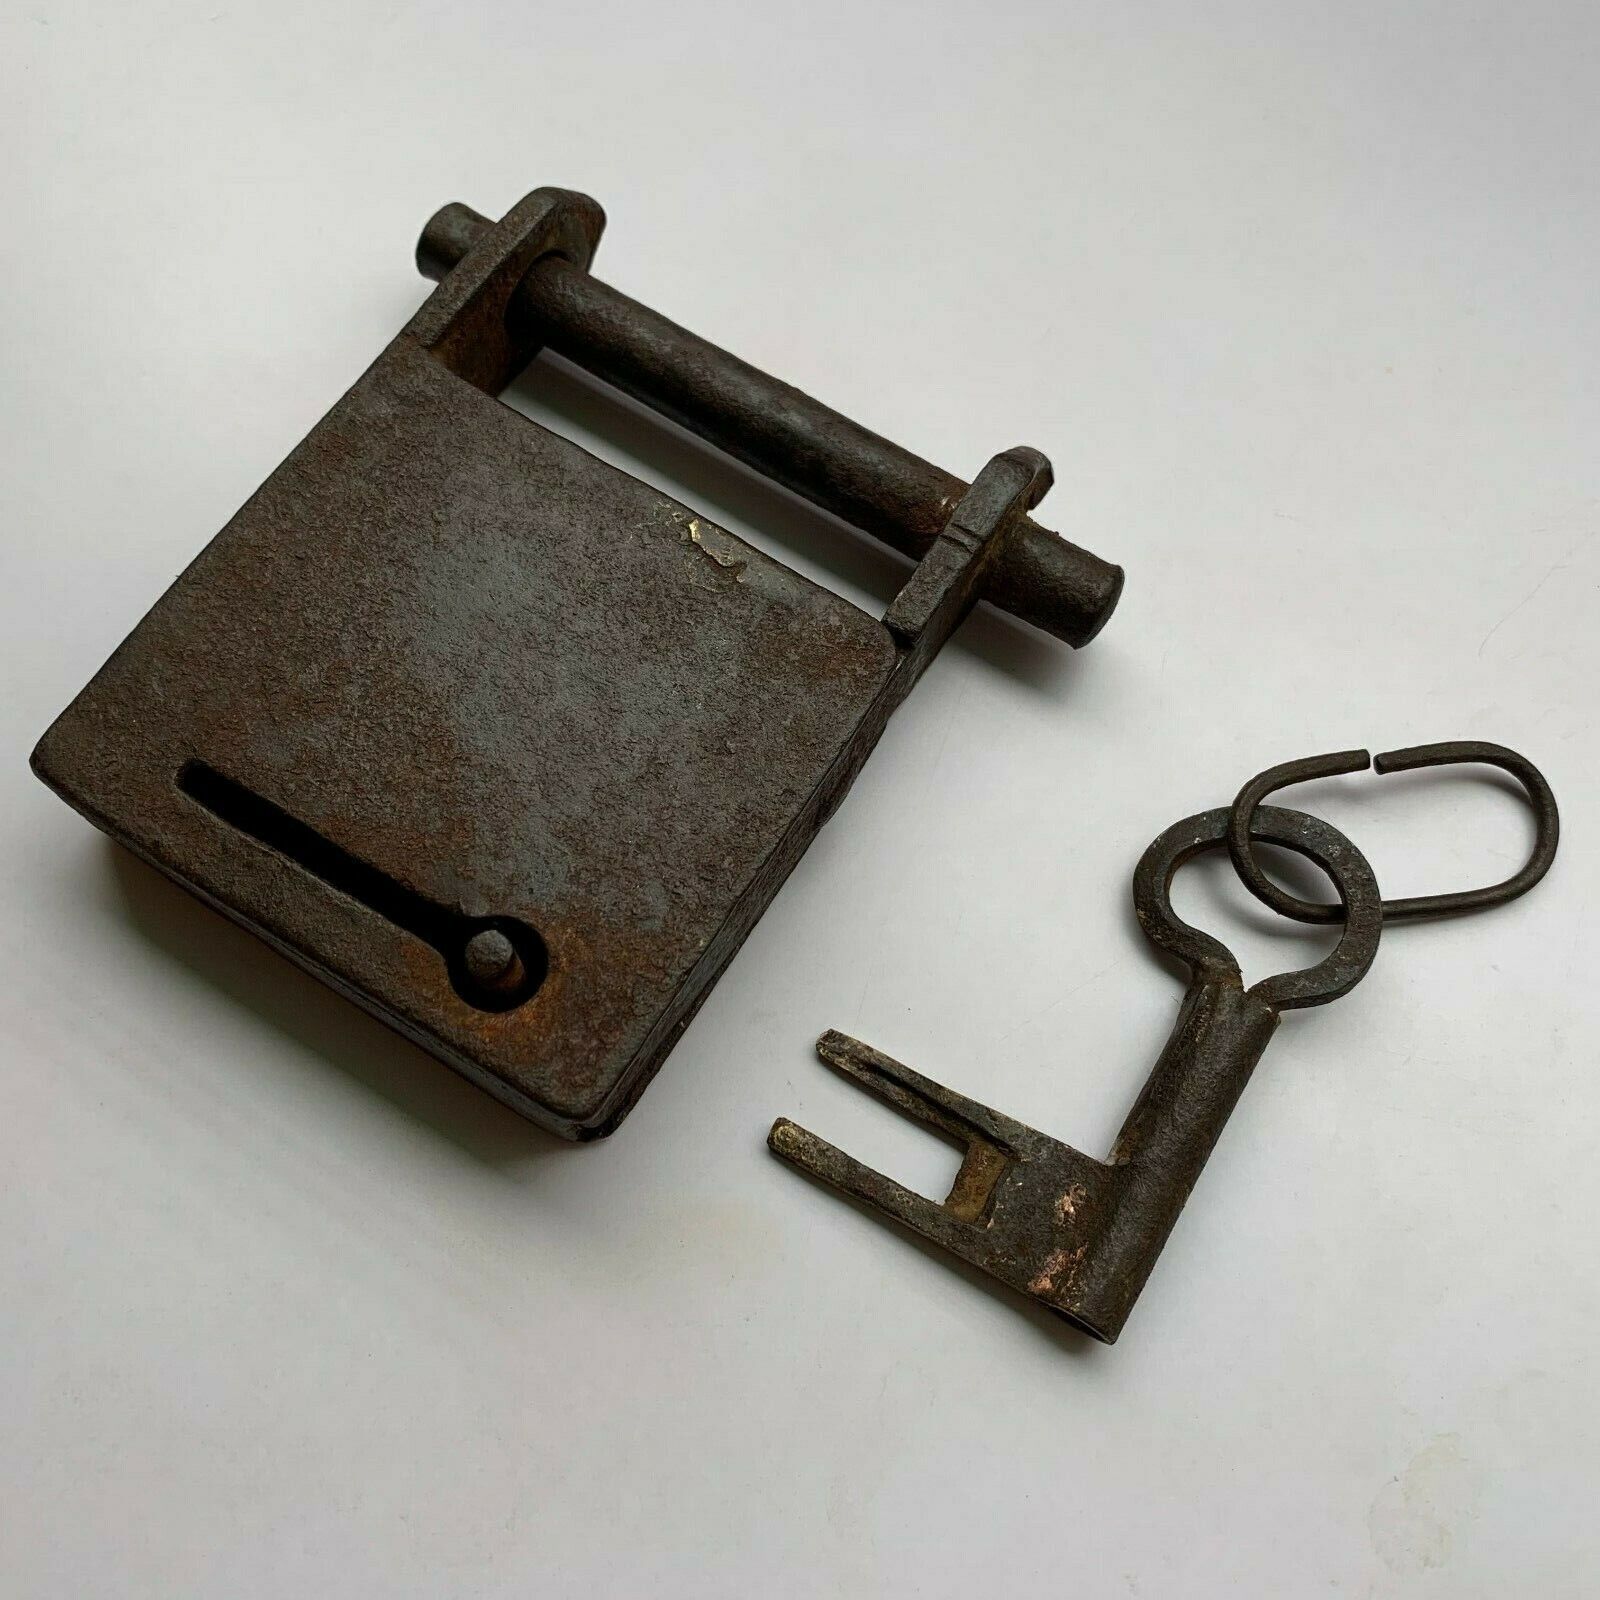 1850's padlock lock with Original key MOST RARE & EARLY,  old or antique Iron